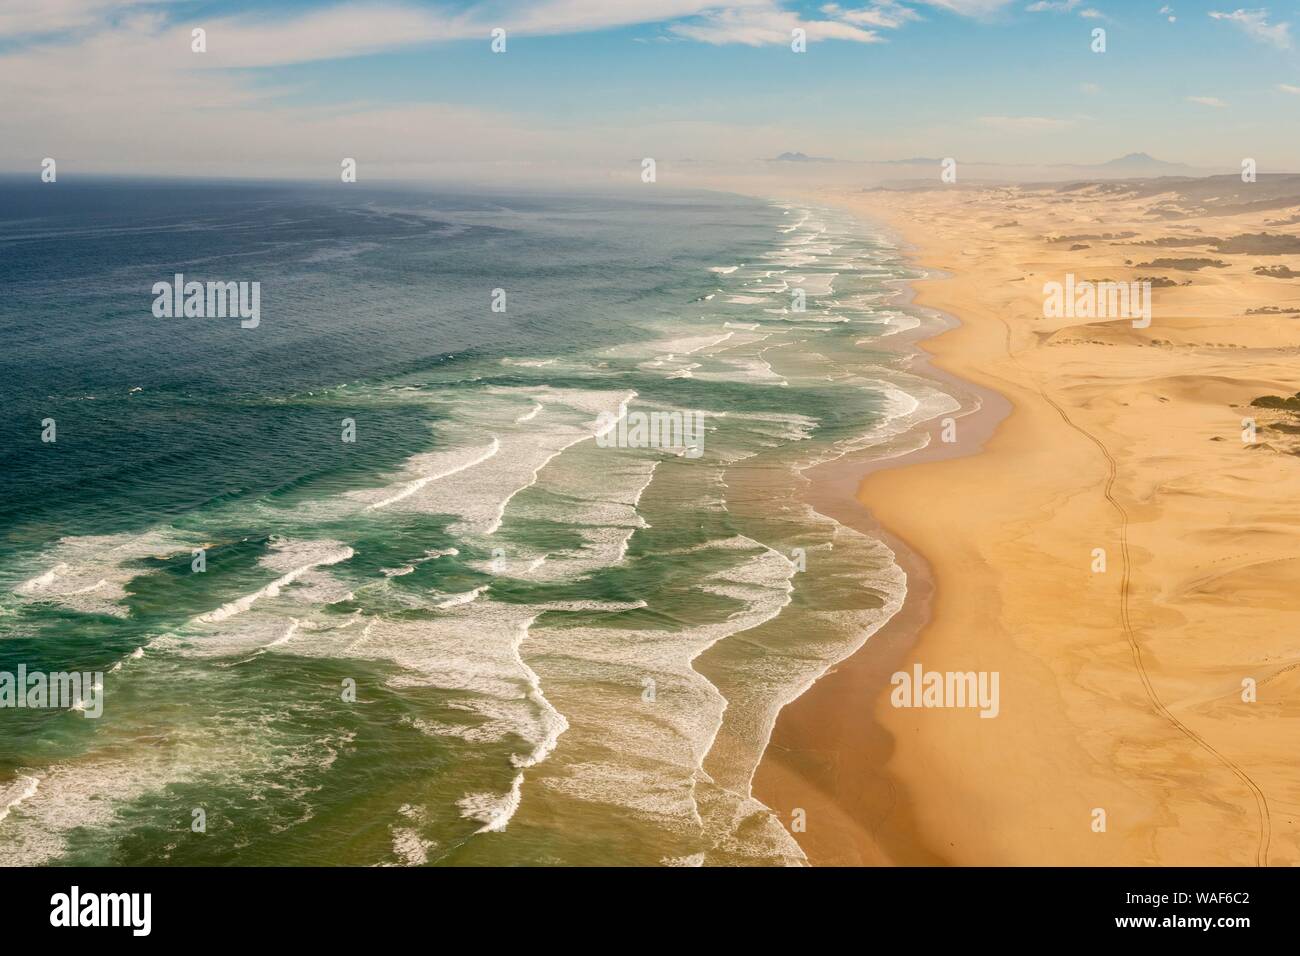 Aerial view, long coastline along sand dunes with waves, Atlantic Ocean, West Coast, South Africa Stock Photo